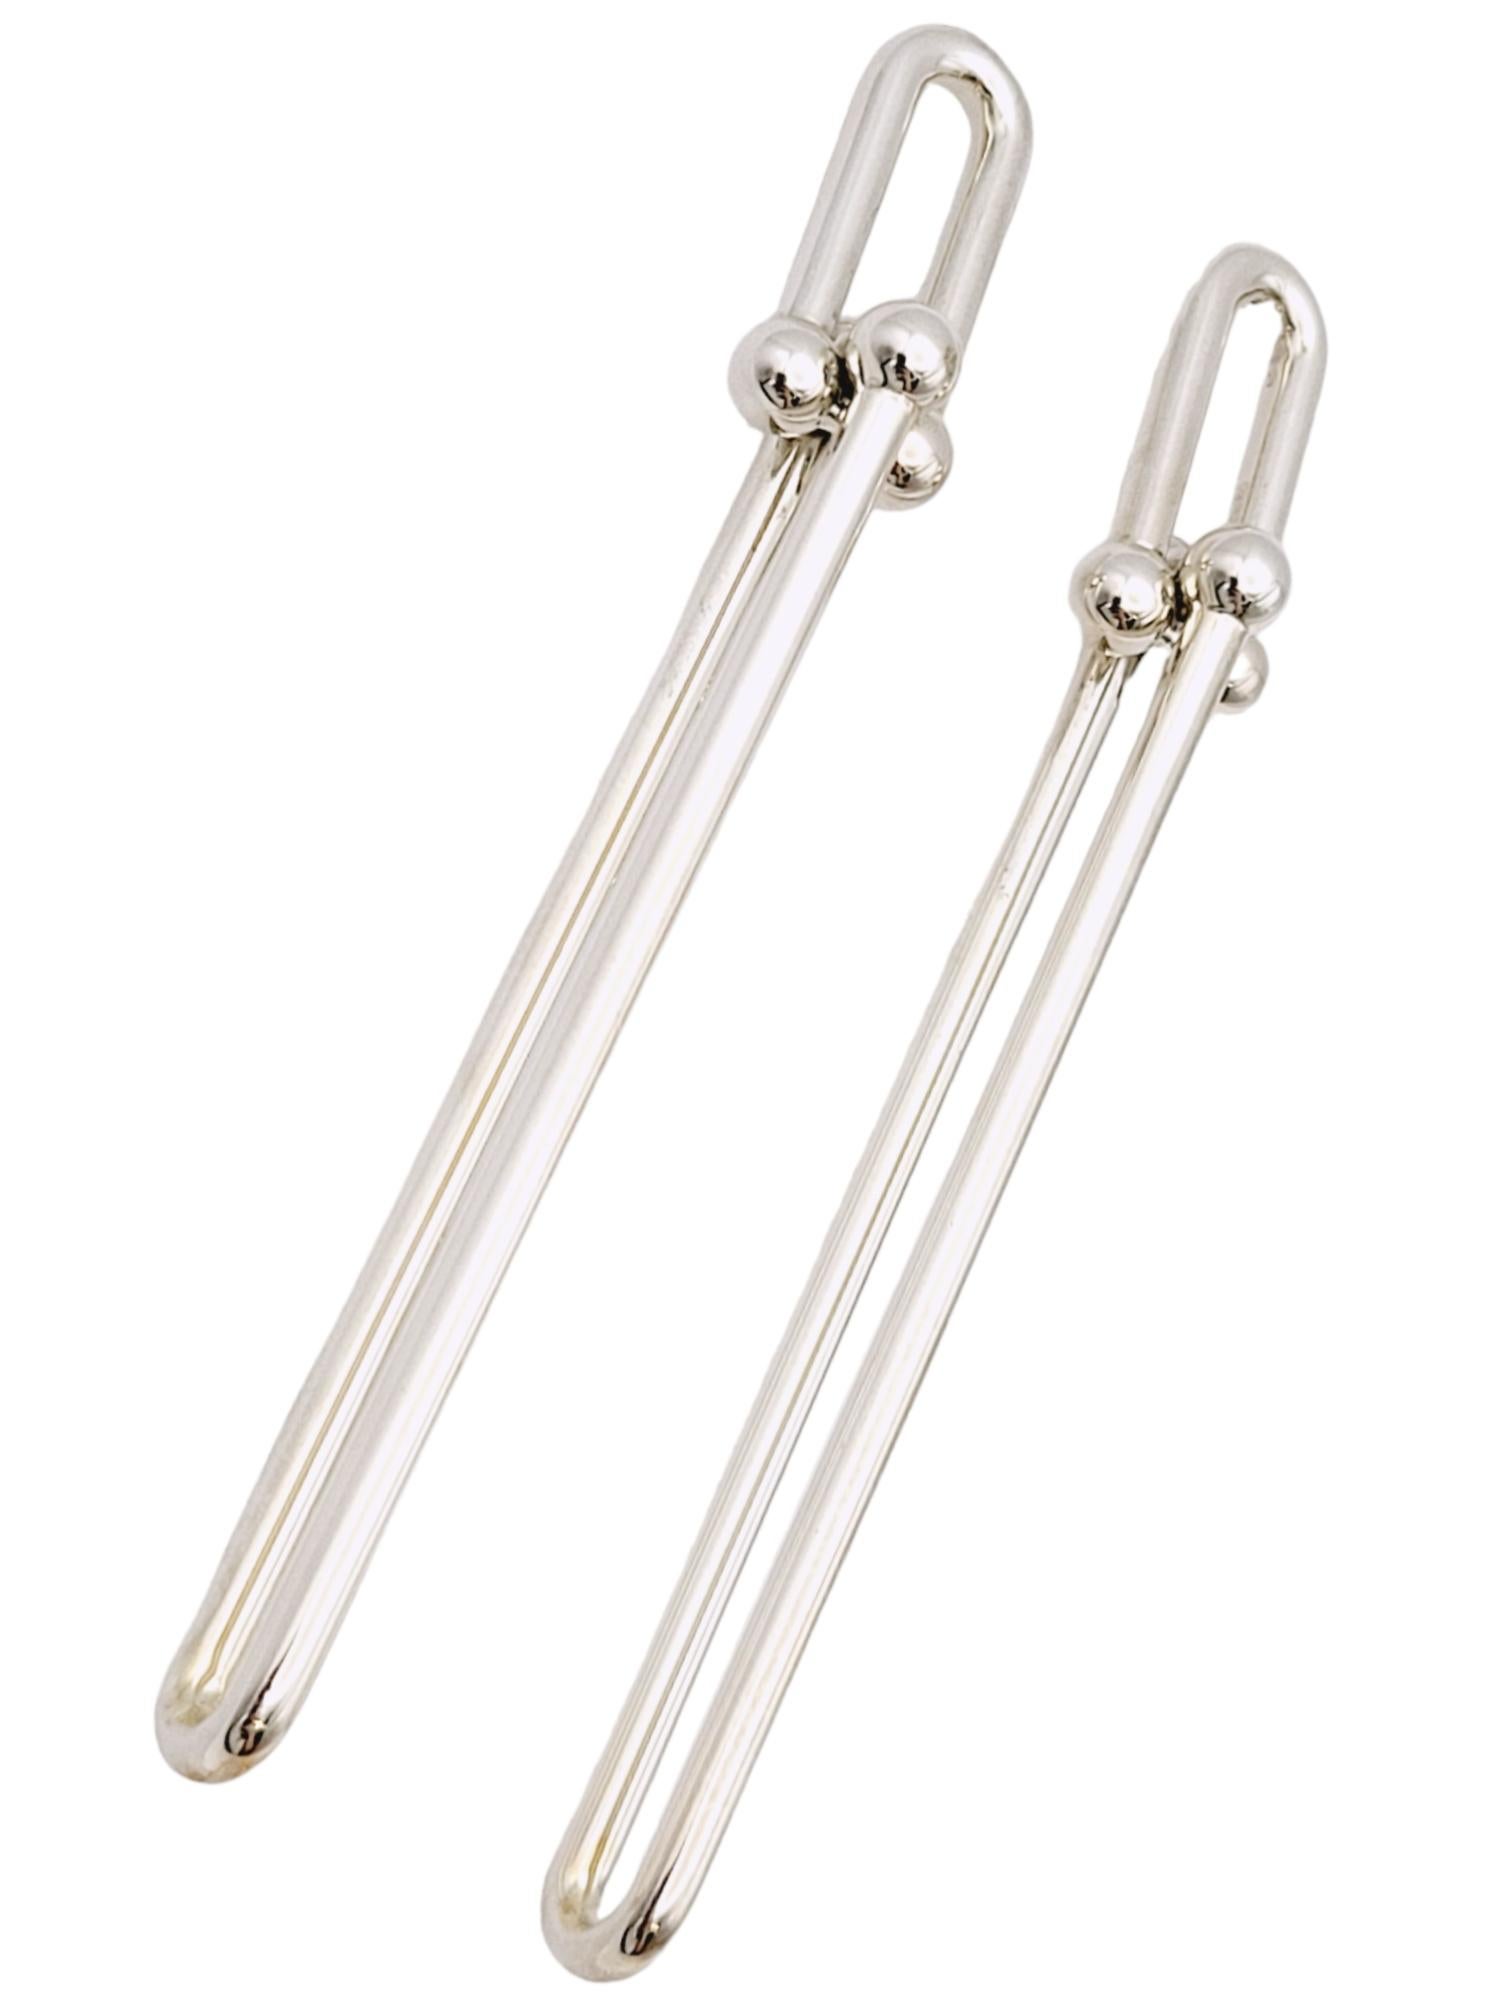 Introducing a stunning pair of Tiffany & Co. HardWear Double Long Link Earrings in sterling silver, designed to capture the spirit of the women of New York City. Founded in 1837 in New York City, Tiffany & Co. is one of the world's most storied